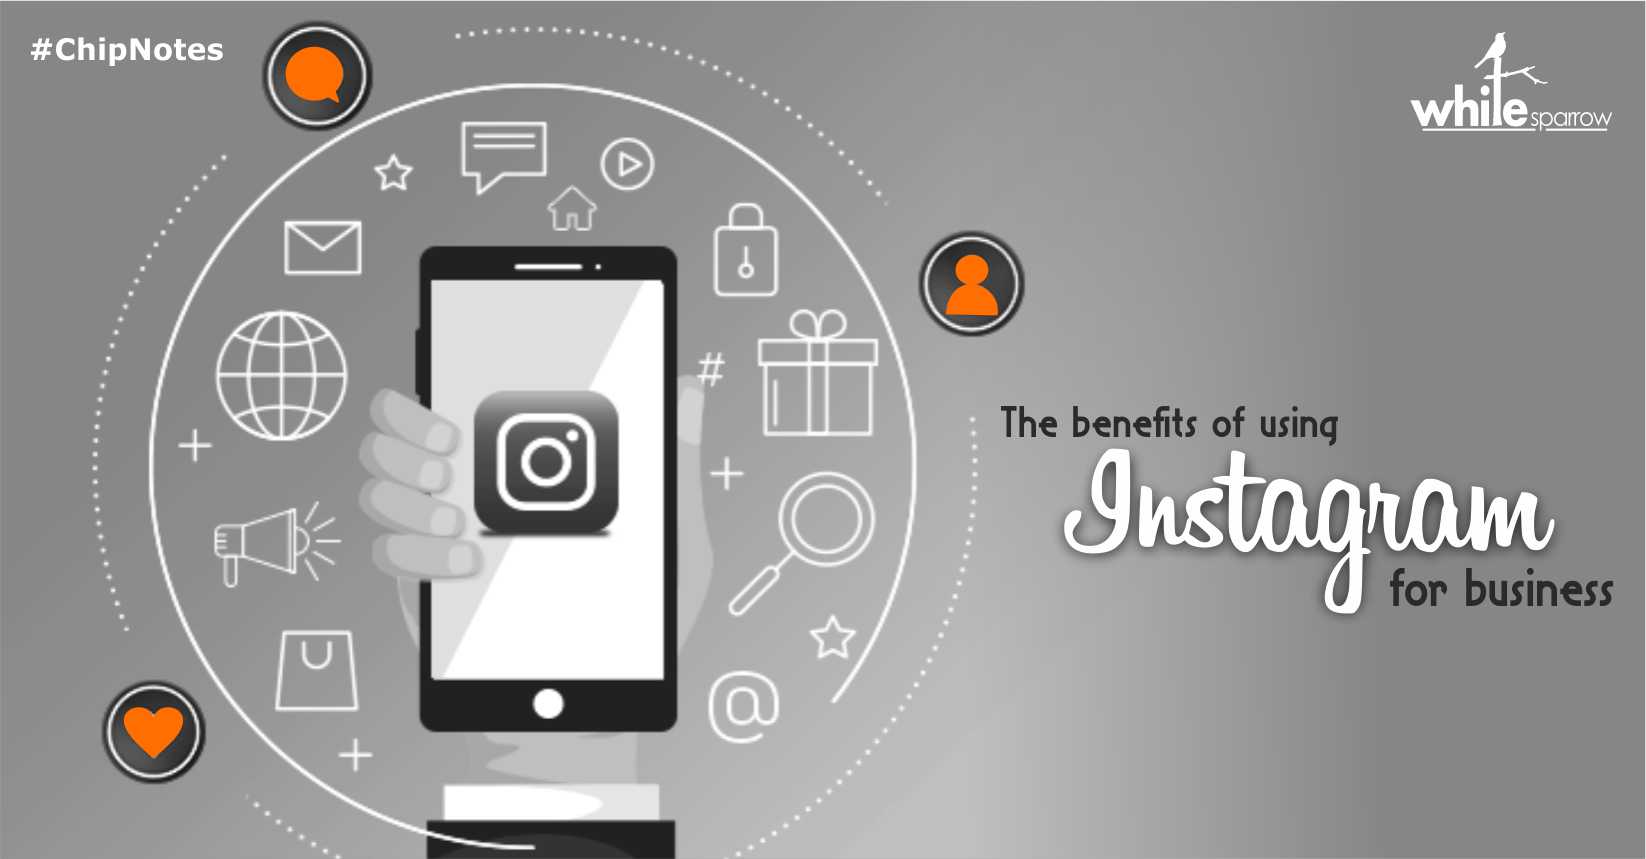 The benefits of using Instagram for business